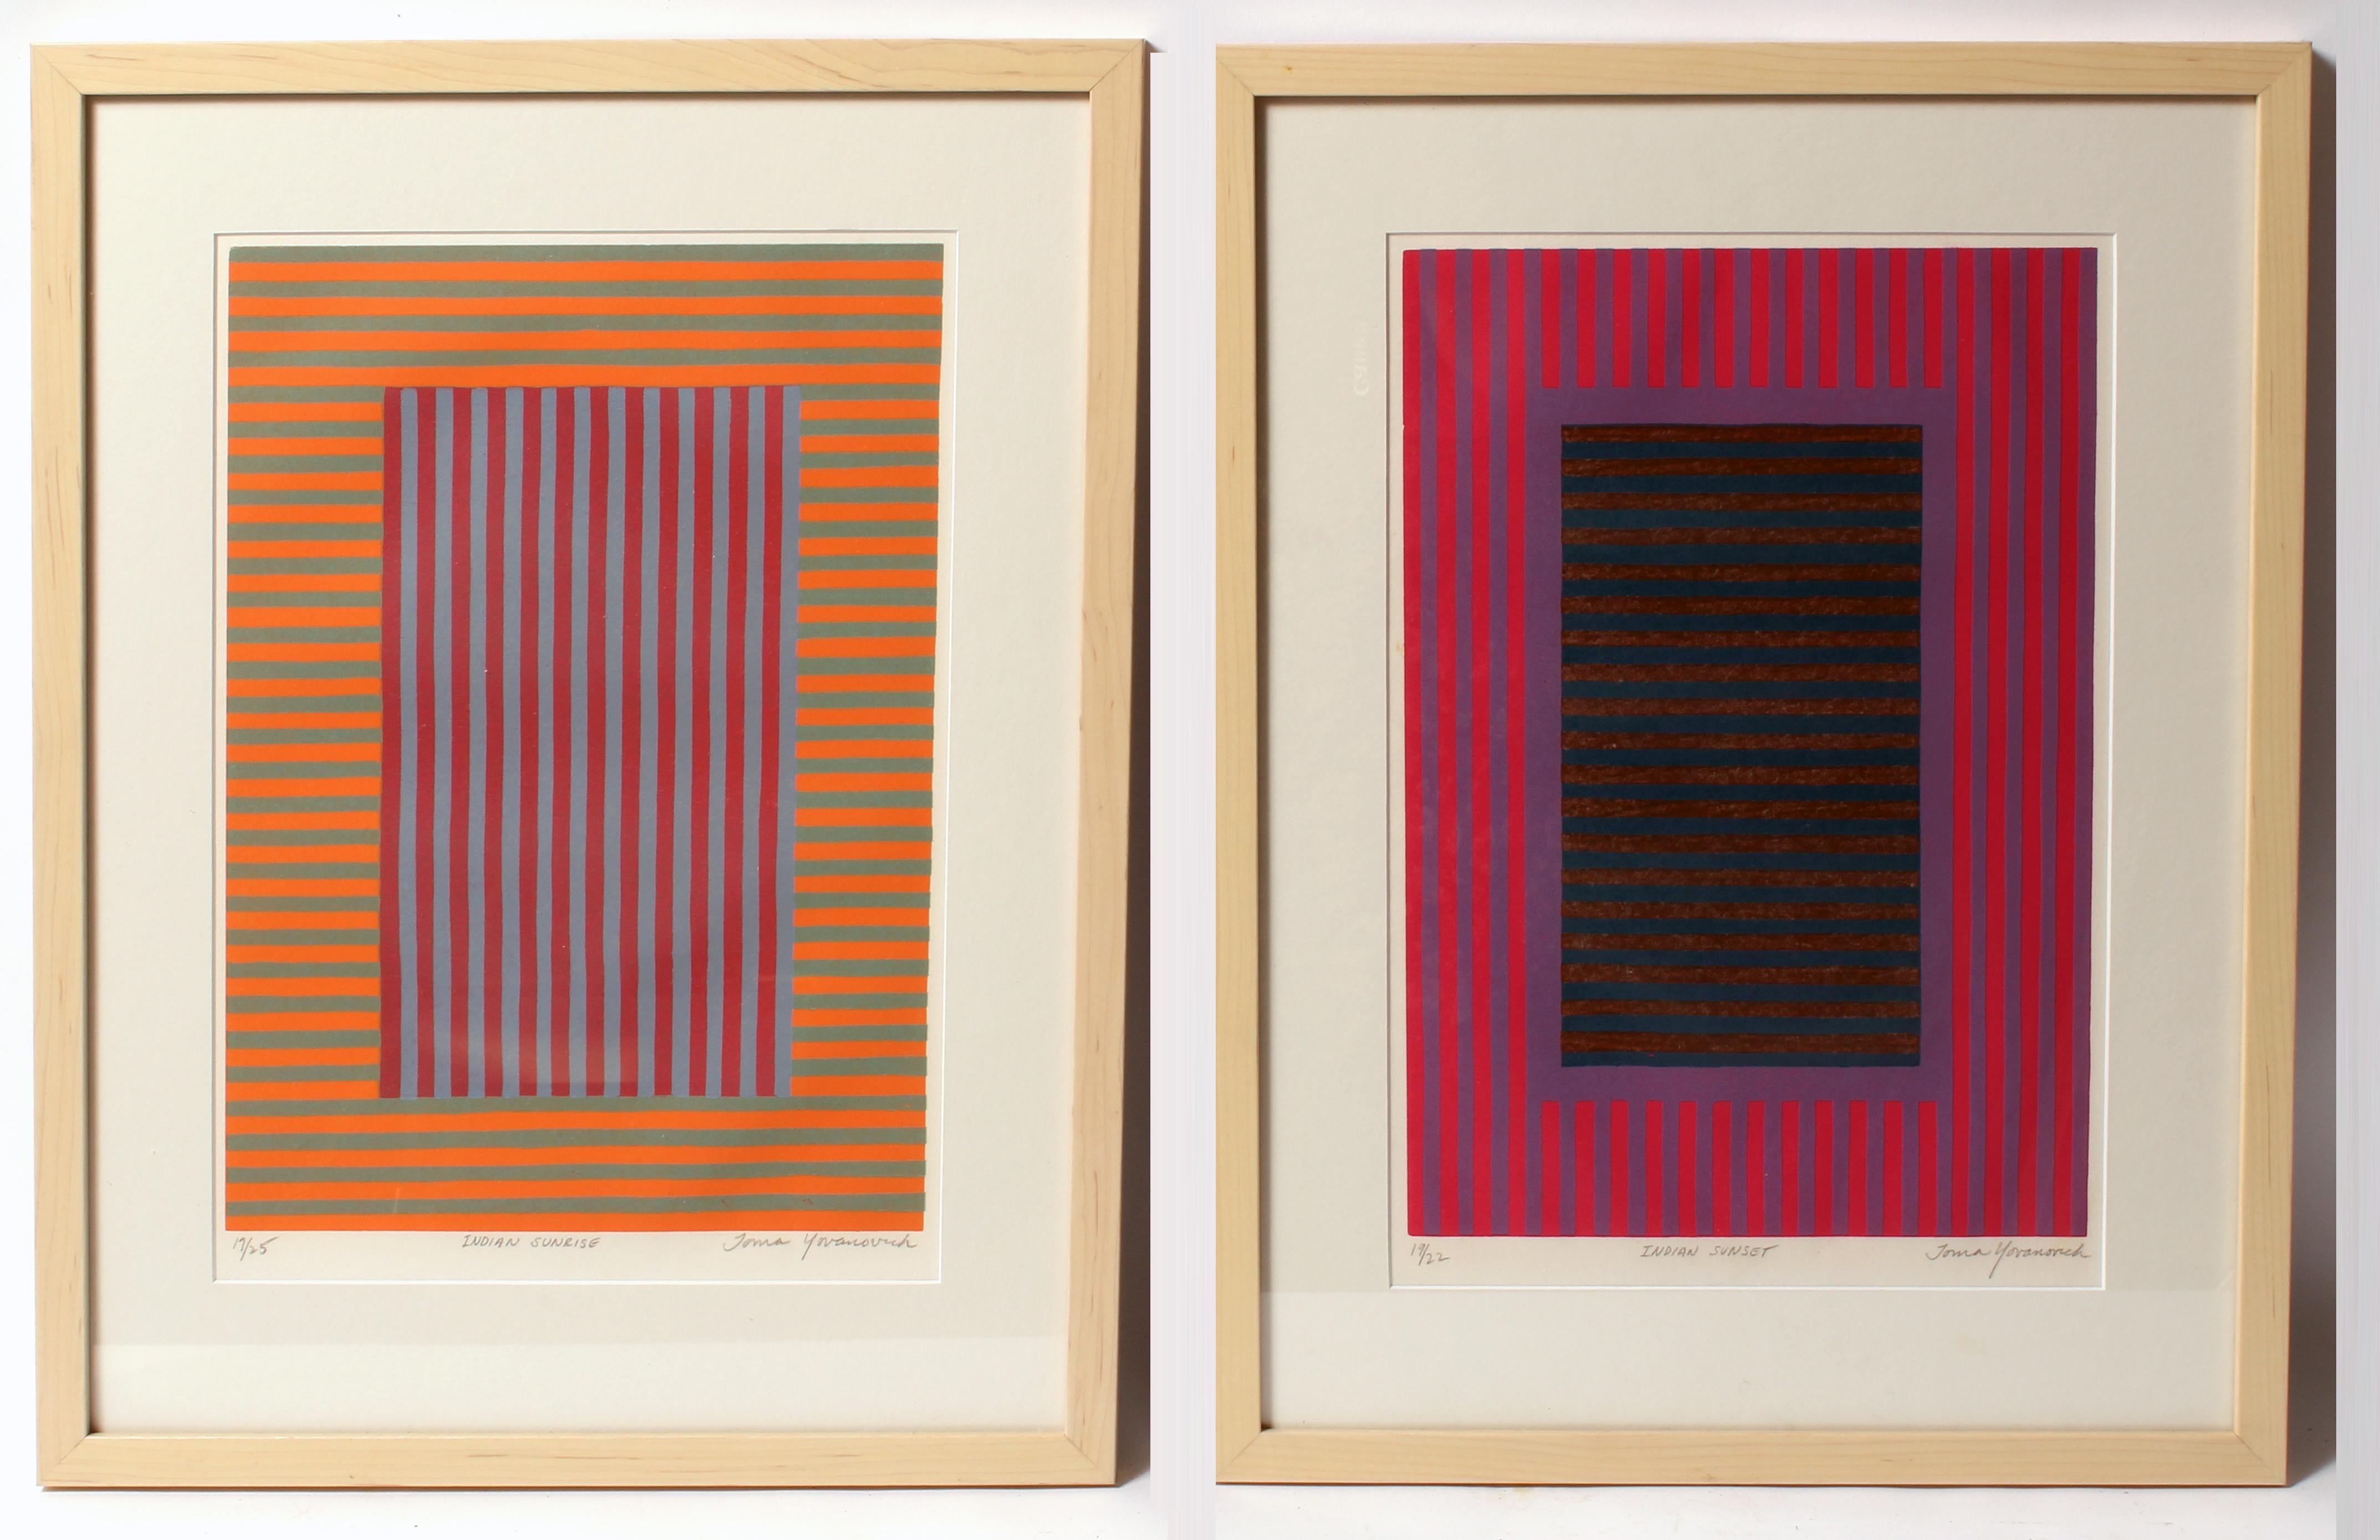 A pair of Mid-Century Modern abstract geometric hard edge wood block prints by American artist Toma Yovanovich (1931- 2016). 

Each work is signed, titled and numbered.  Indian Sunrise and Indian Sunset are the appropriate titles as one if featuring